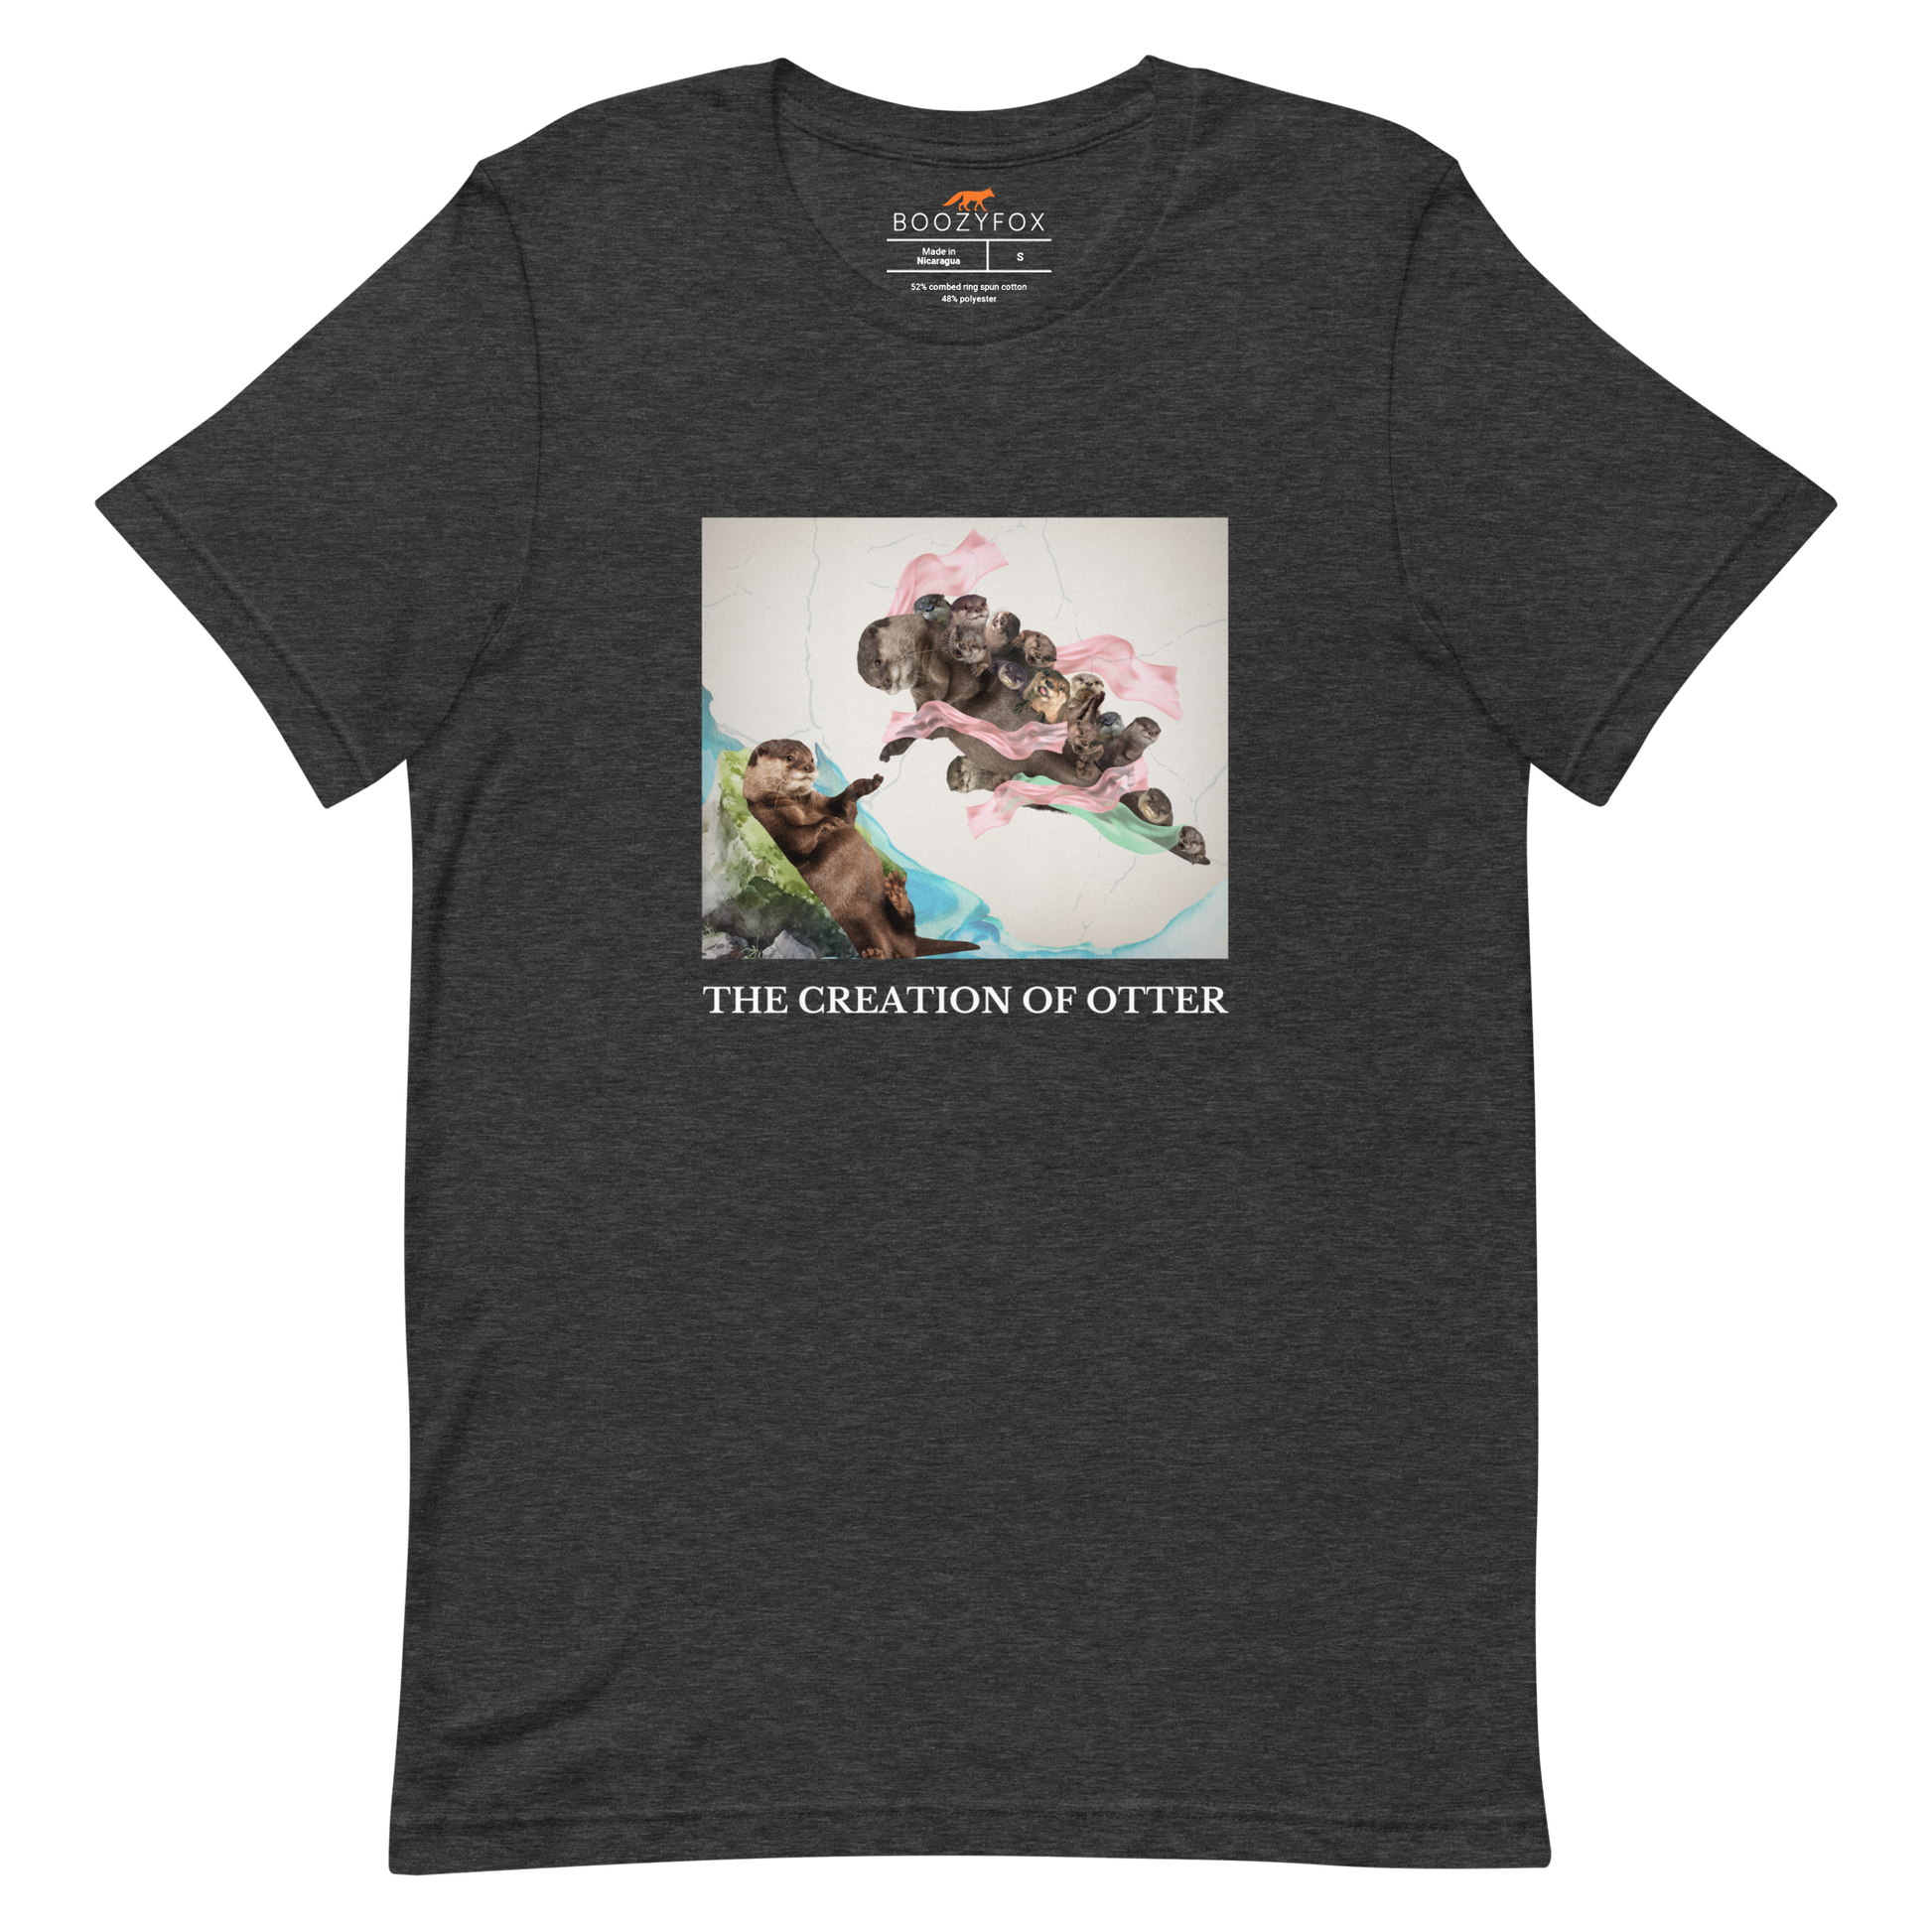 Dark Grey Heather Premium Otter Tee featuring a playful The Creation of Otter parody of Michelangelo's masterpiece - Artsy/Funny Graphic Otter Tees - Boozy Fox